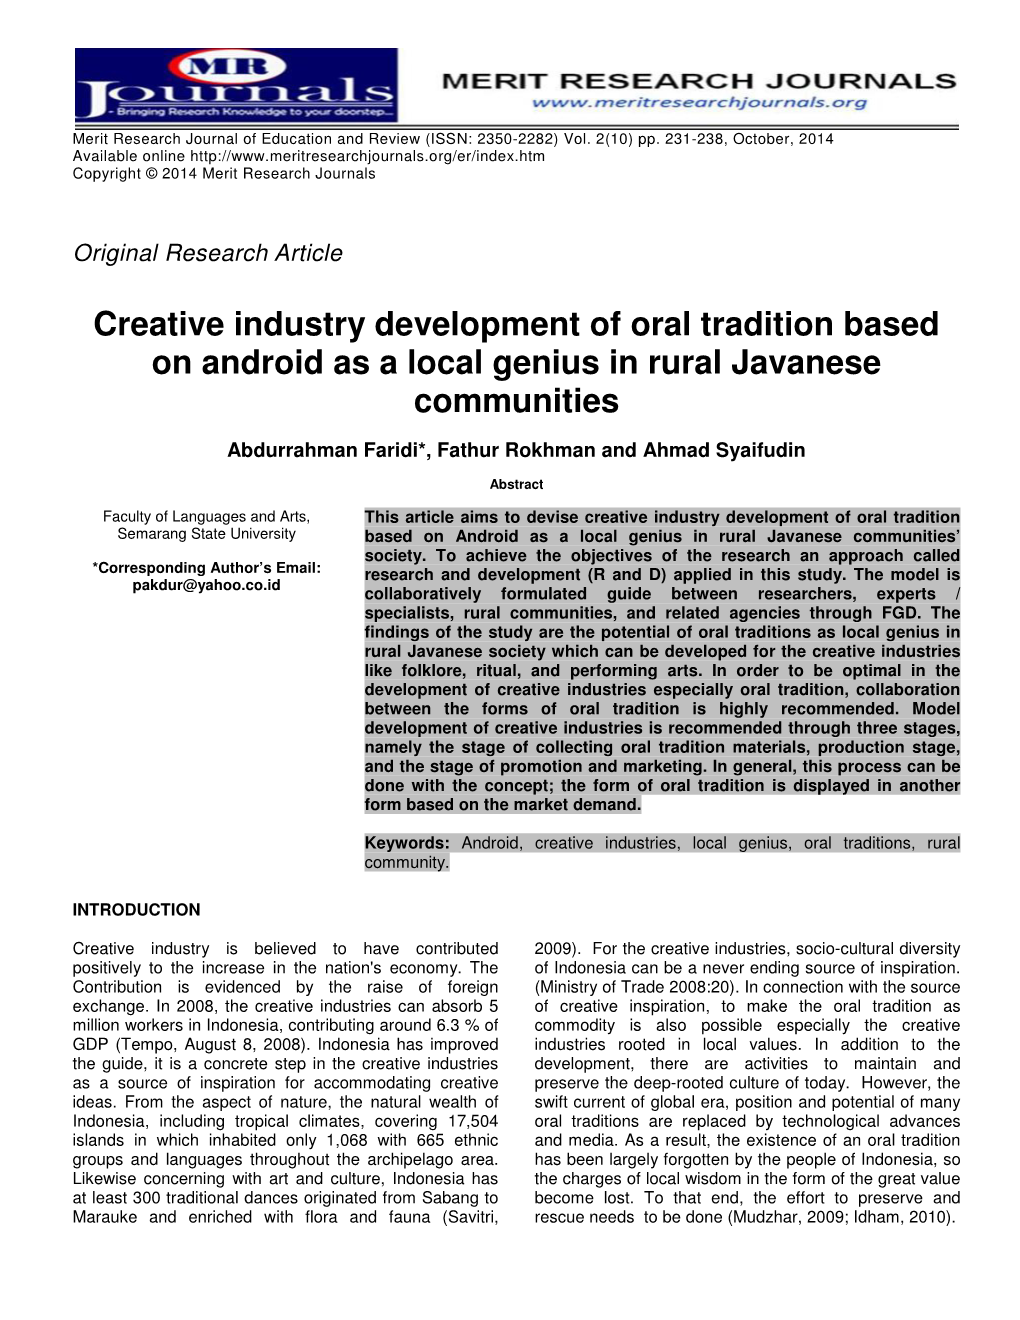 Creative Industry Development of Oral Tradition Based on Android As a Local Genius in Rural Javanese Communities